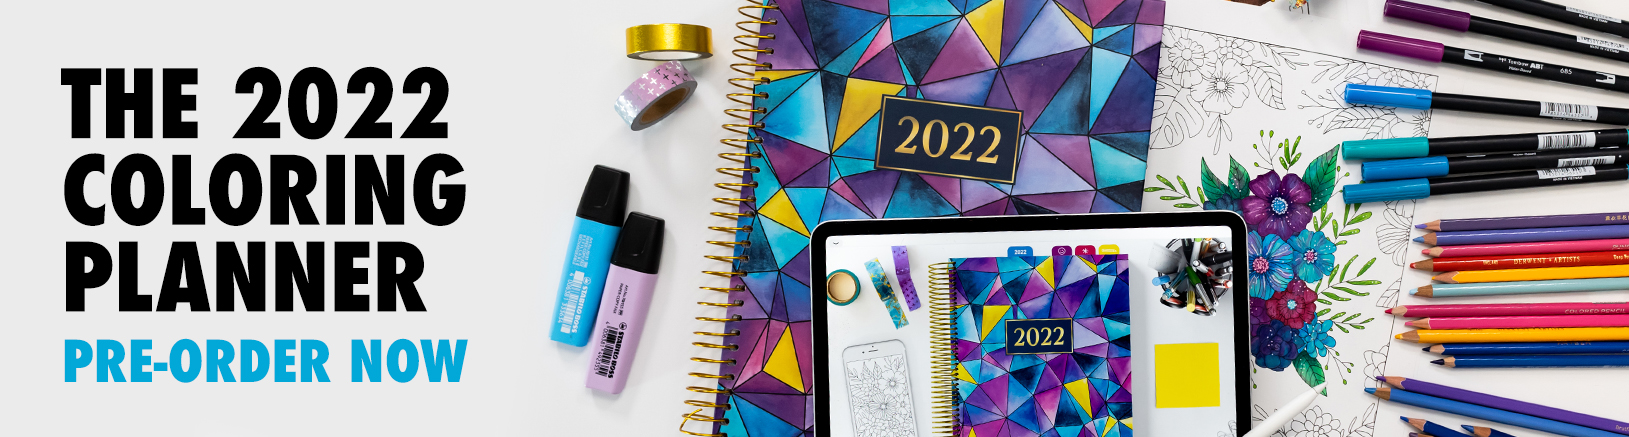 The 2022 Coloring Planner